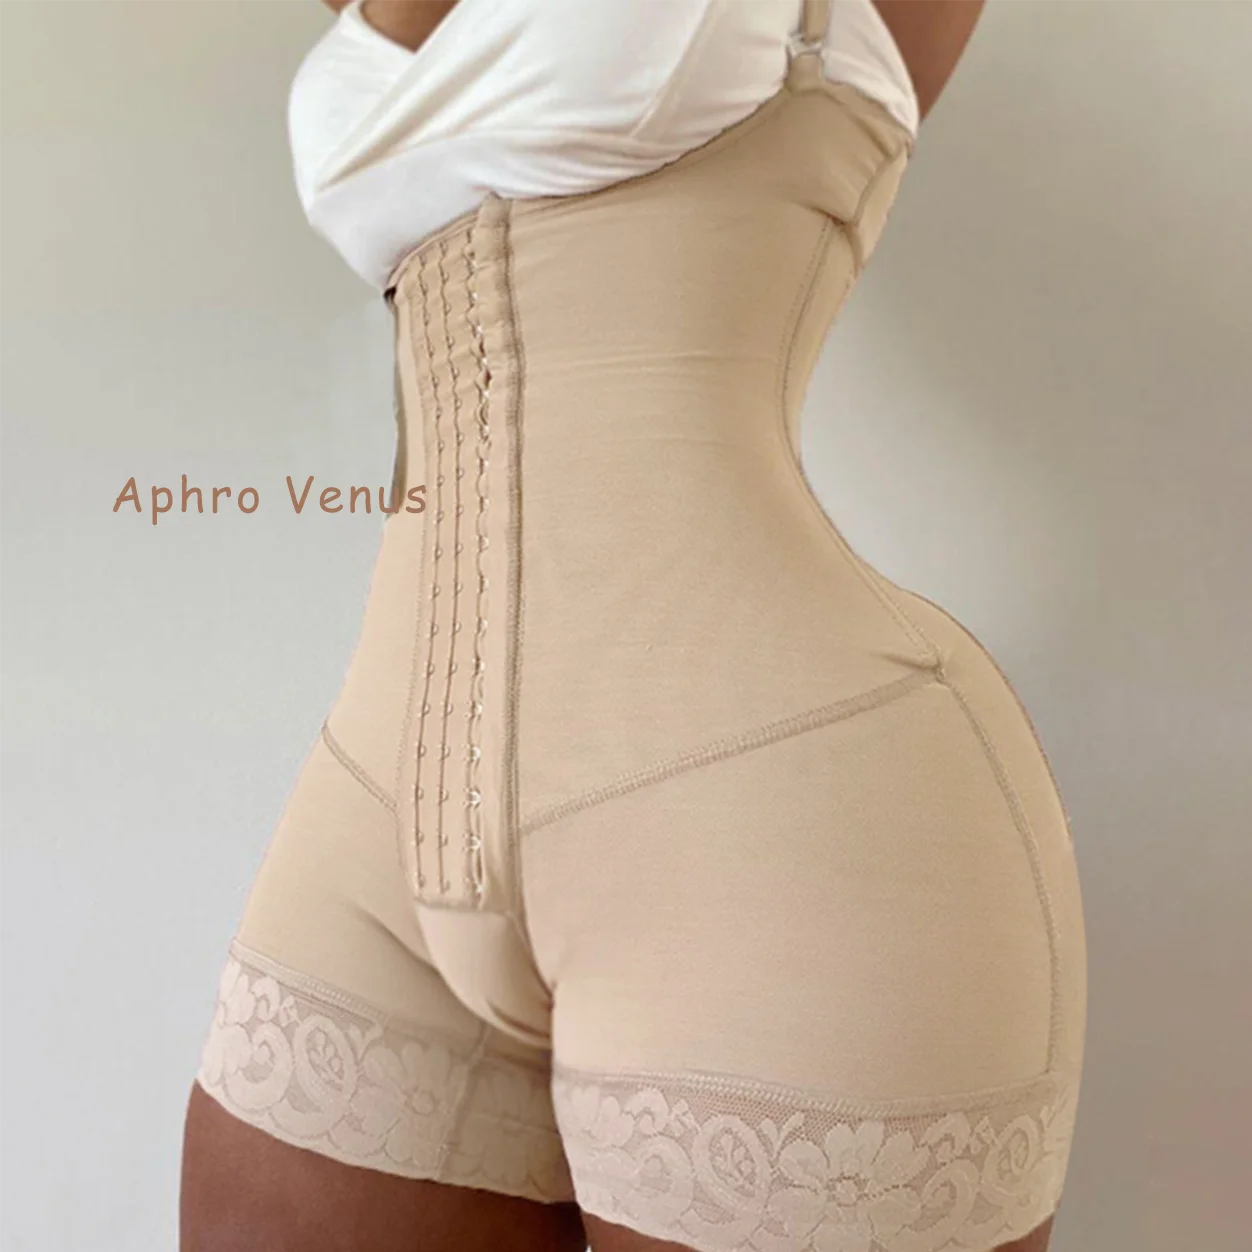 Fajas Colombianas High Compression Full Body Hourglass Girdle Waist Trainer Butt Lifter Post-operative Shorts Women's Shapewear